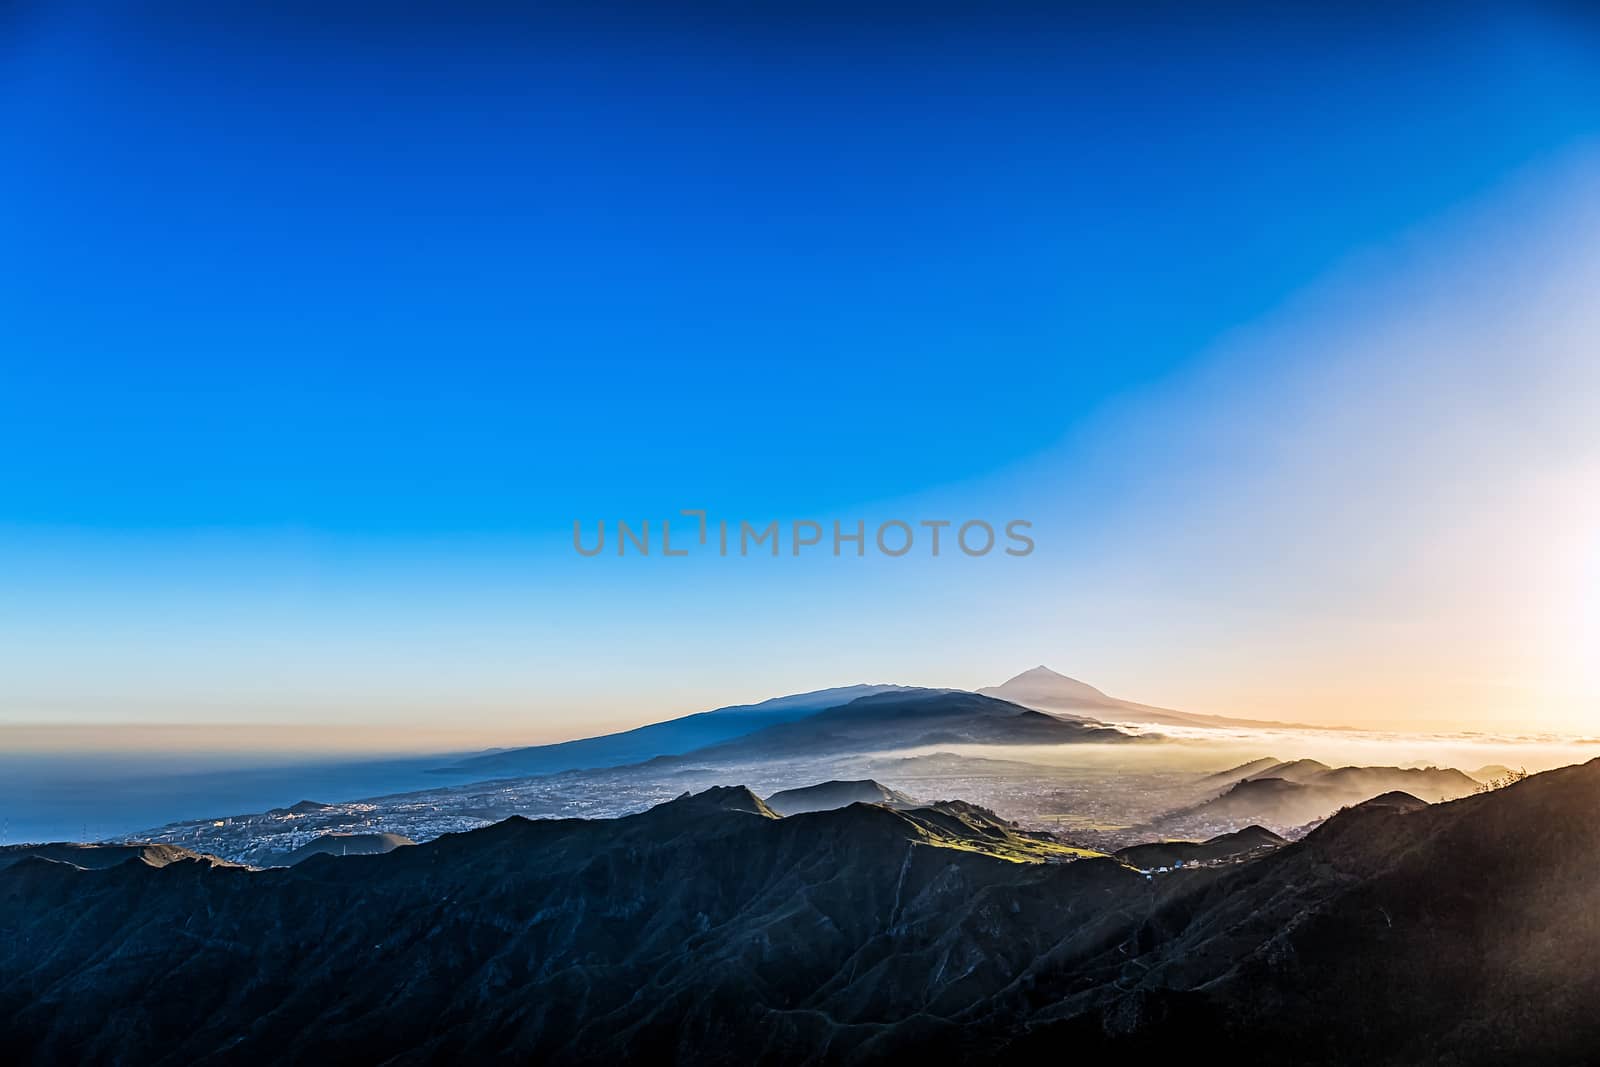 Sunset at evening in mountains and blue sky with haze and Teide volcano on background in Tenerife Canary island, Spain at spring or summer